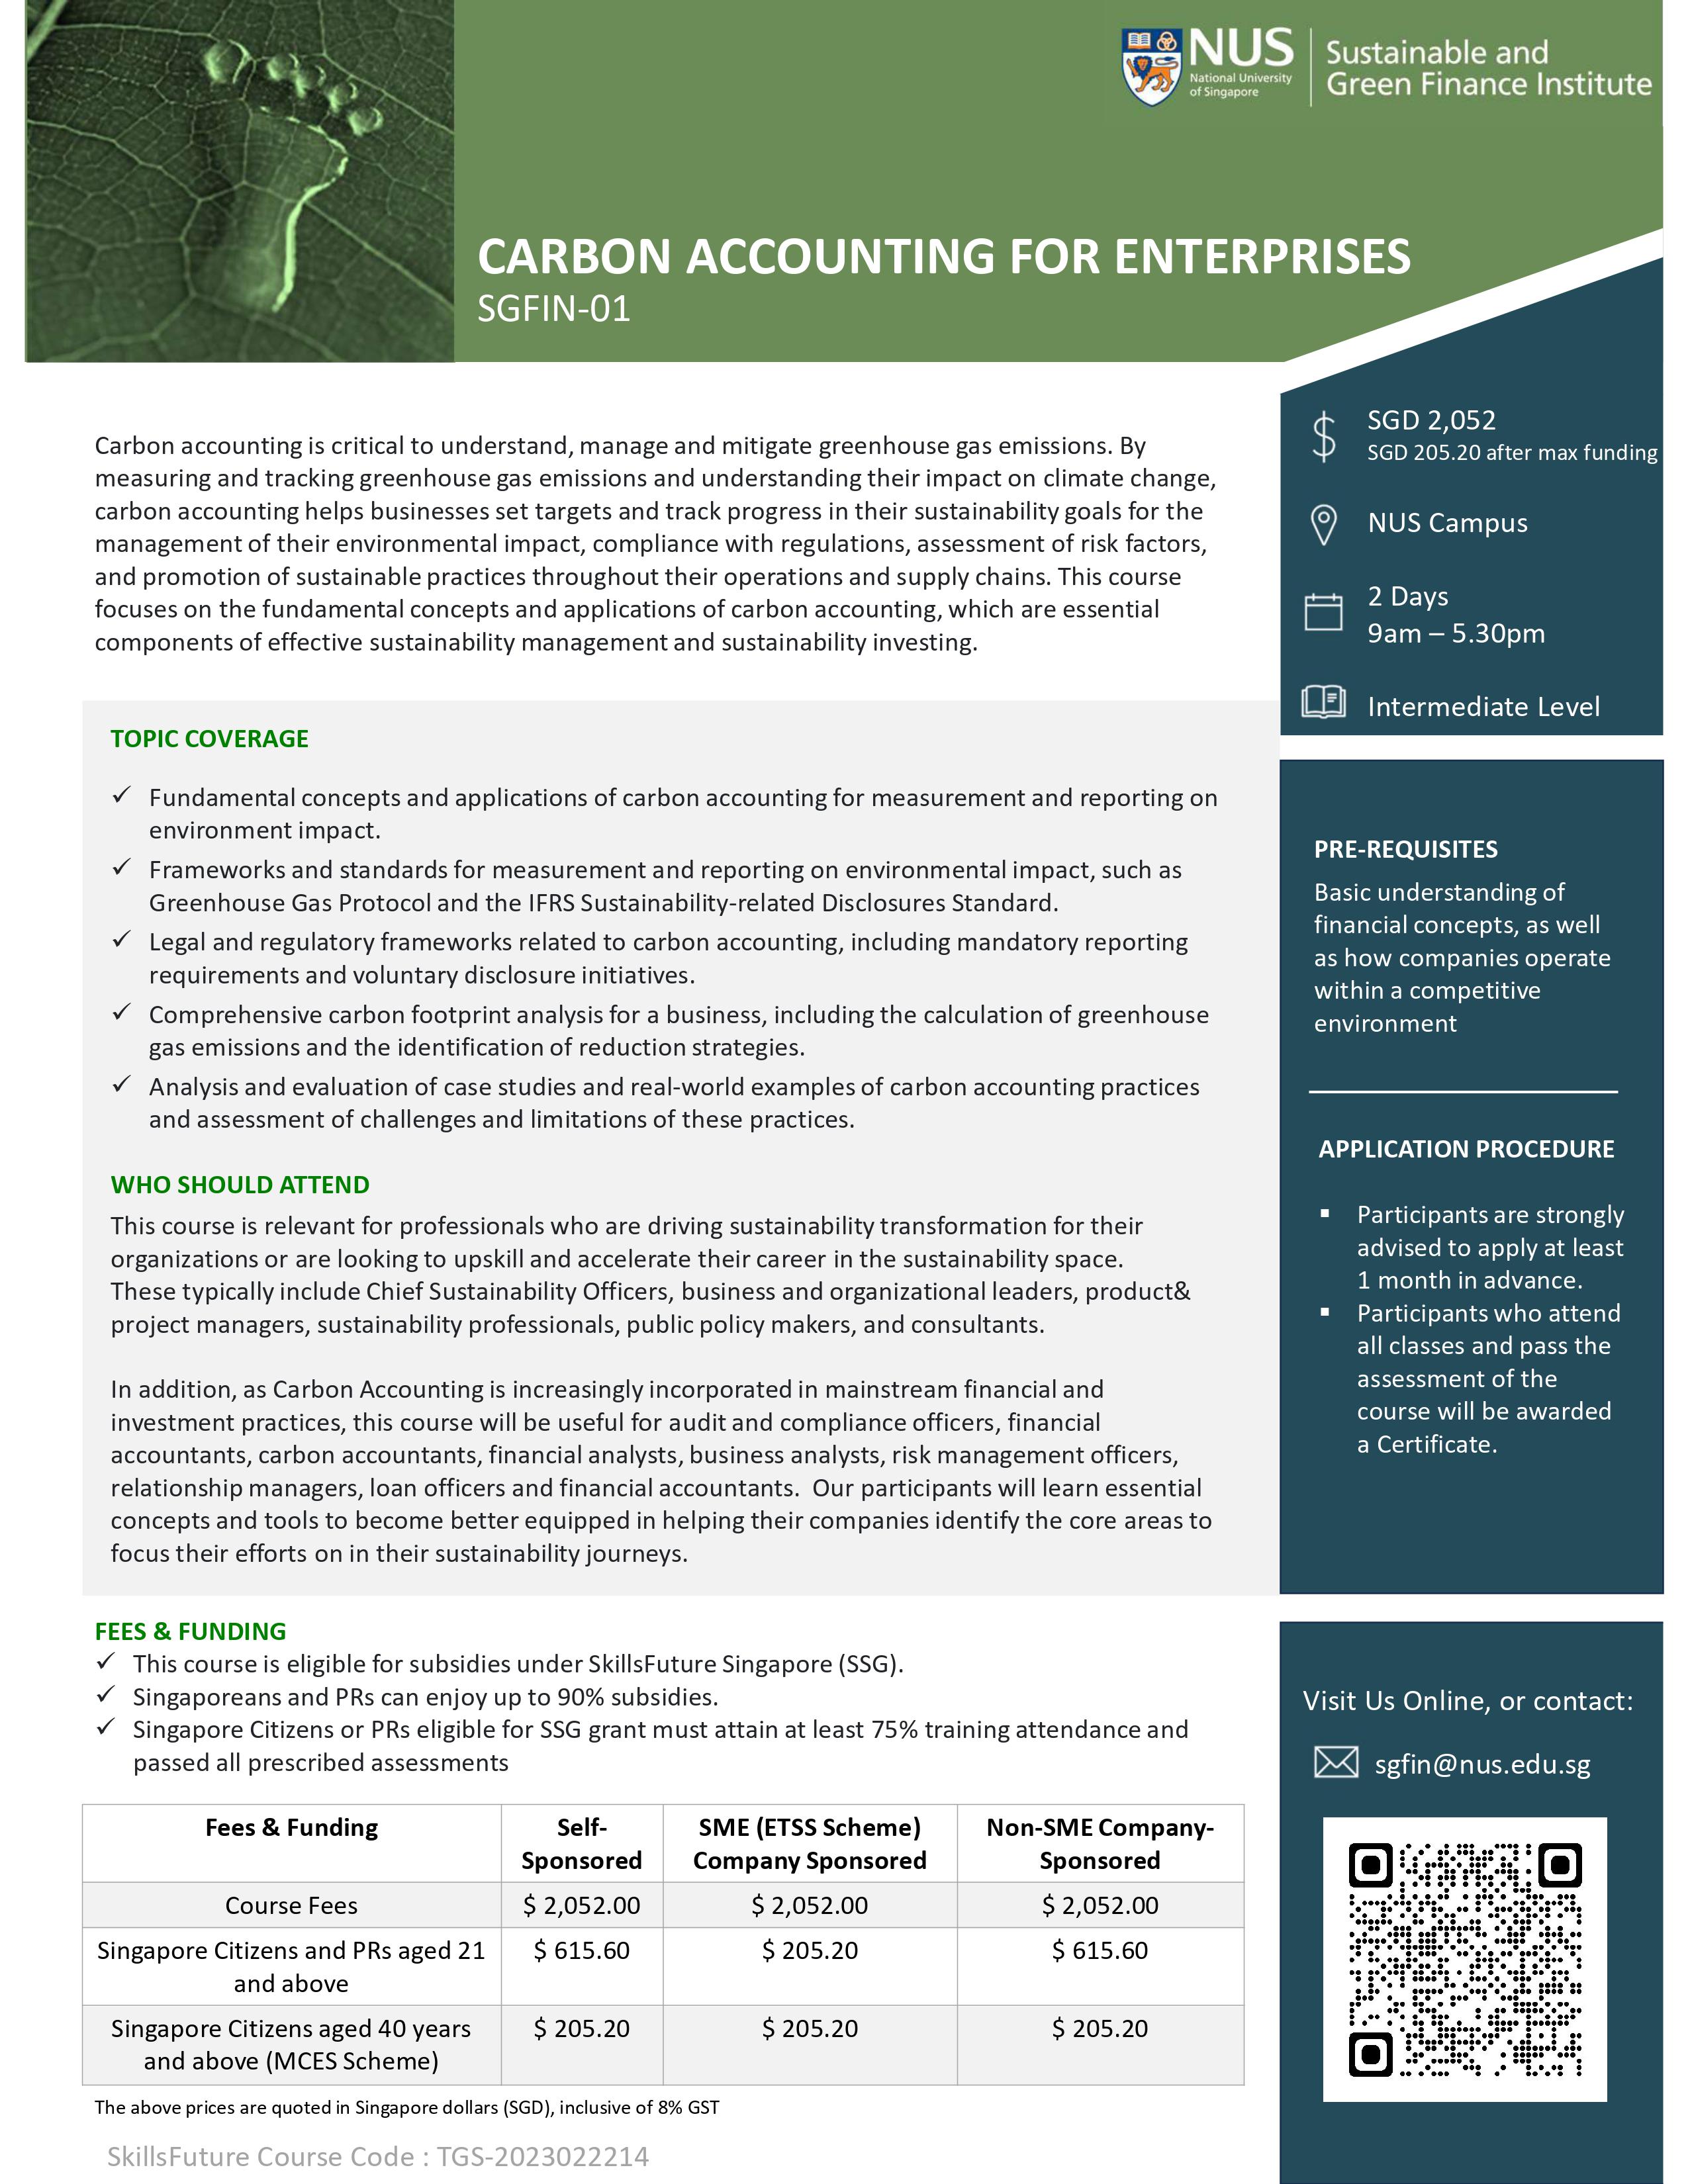 Carbon Accounting Professional Programme Brochure v8